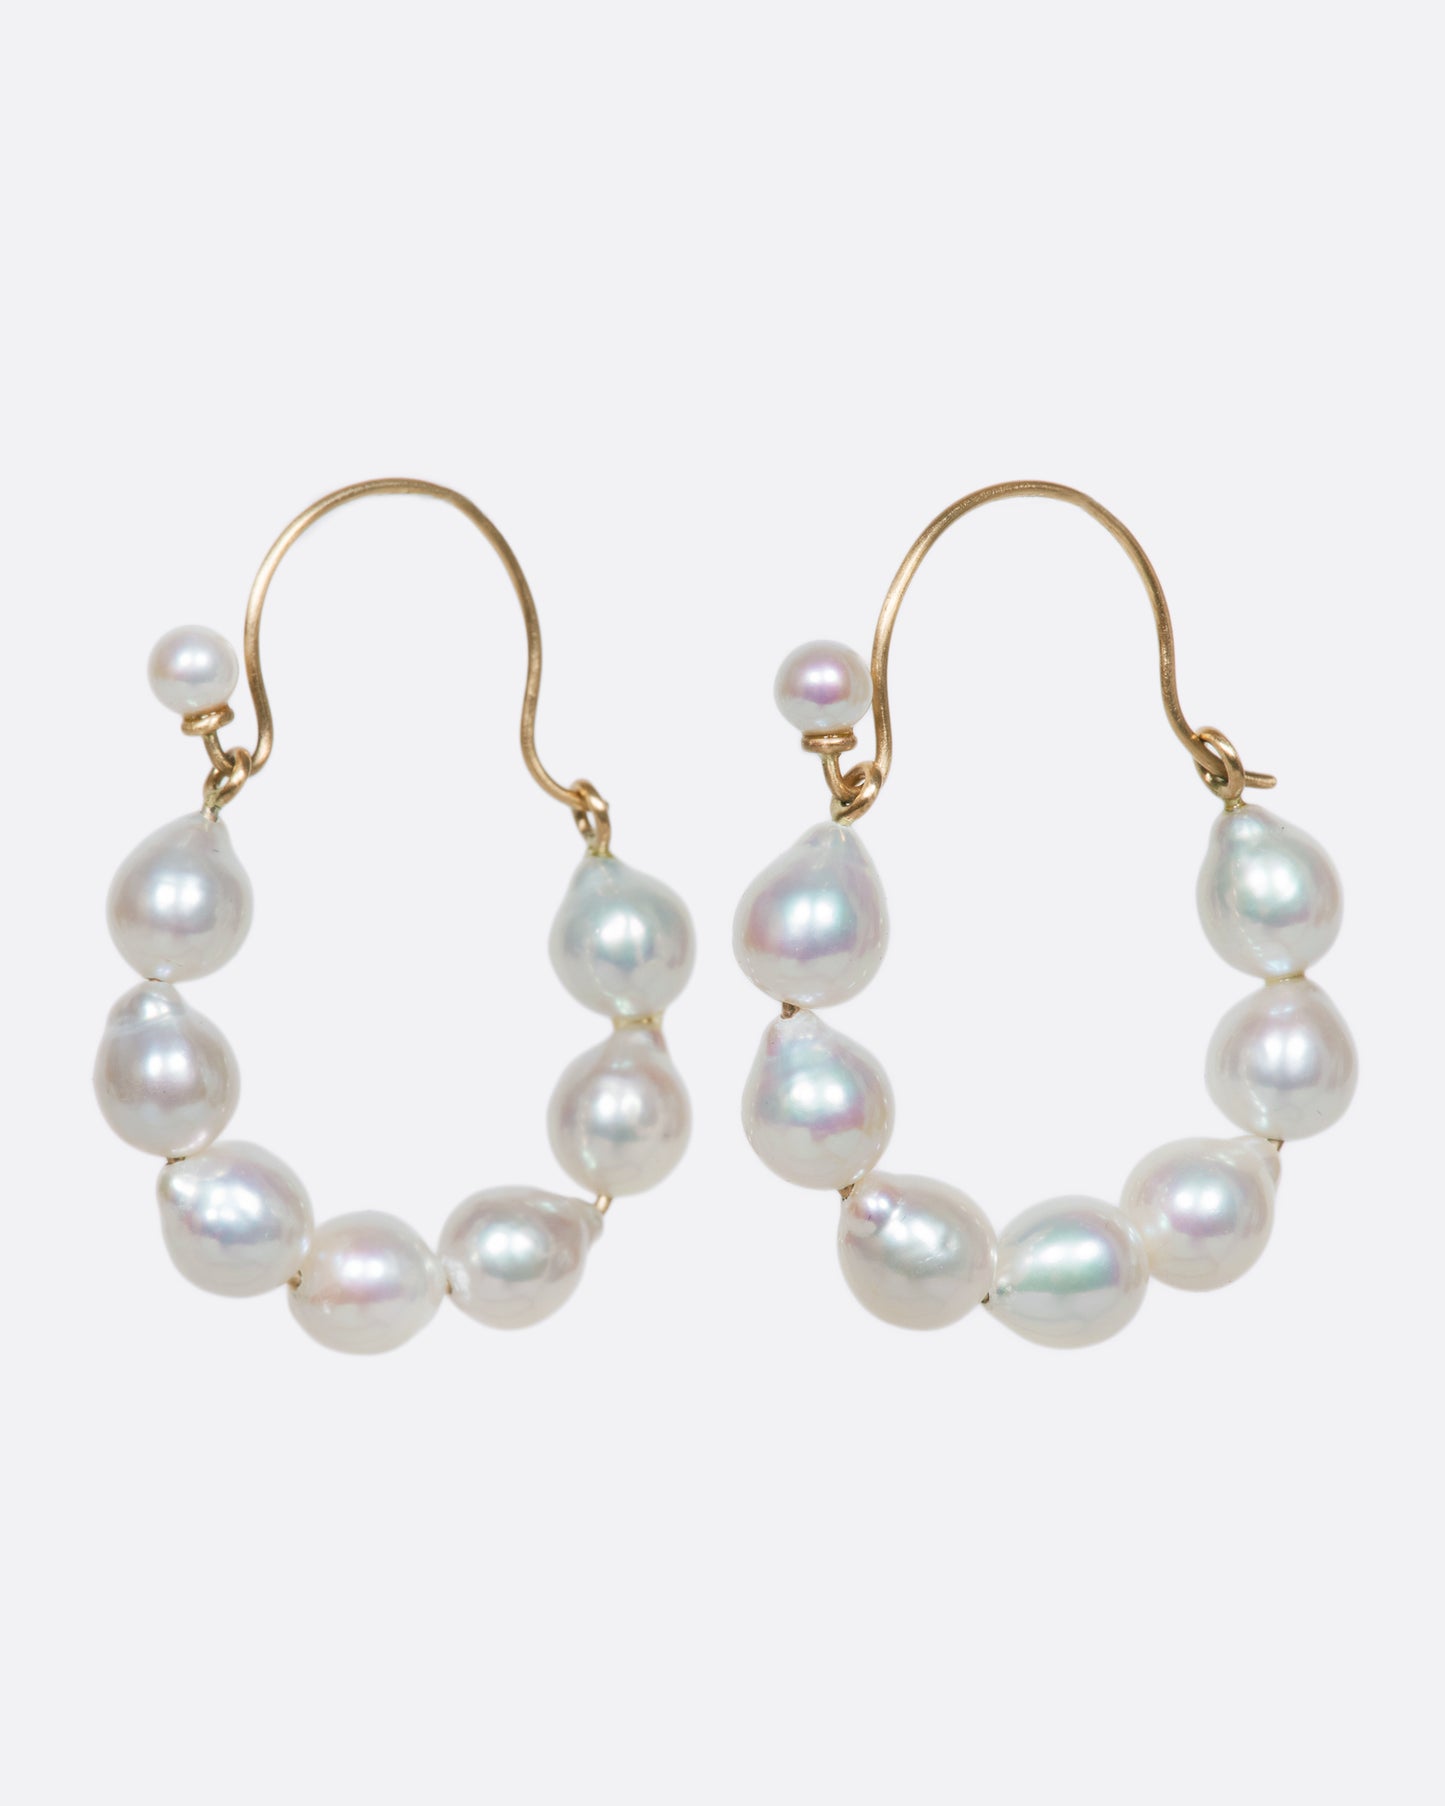 A lovely pair of baroque pearl hoops with a tiny pearl hiding the closure